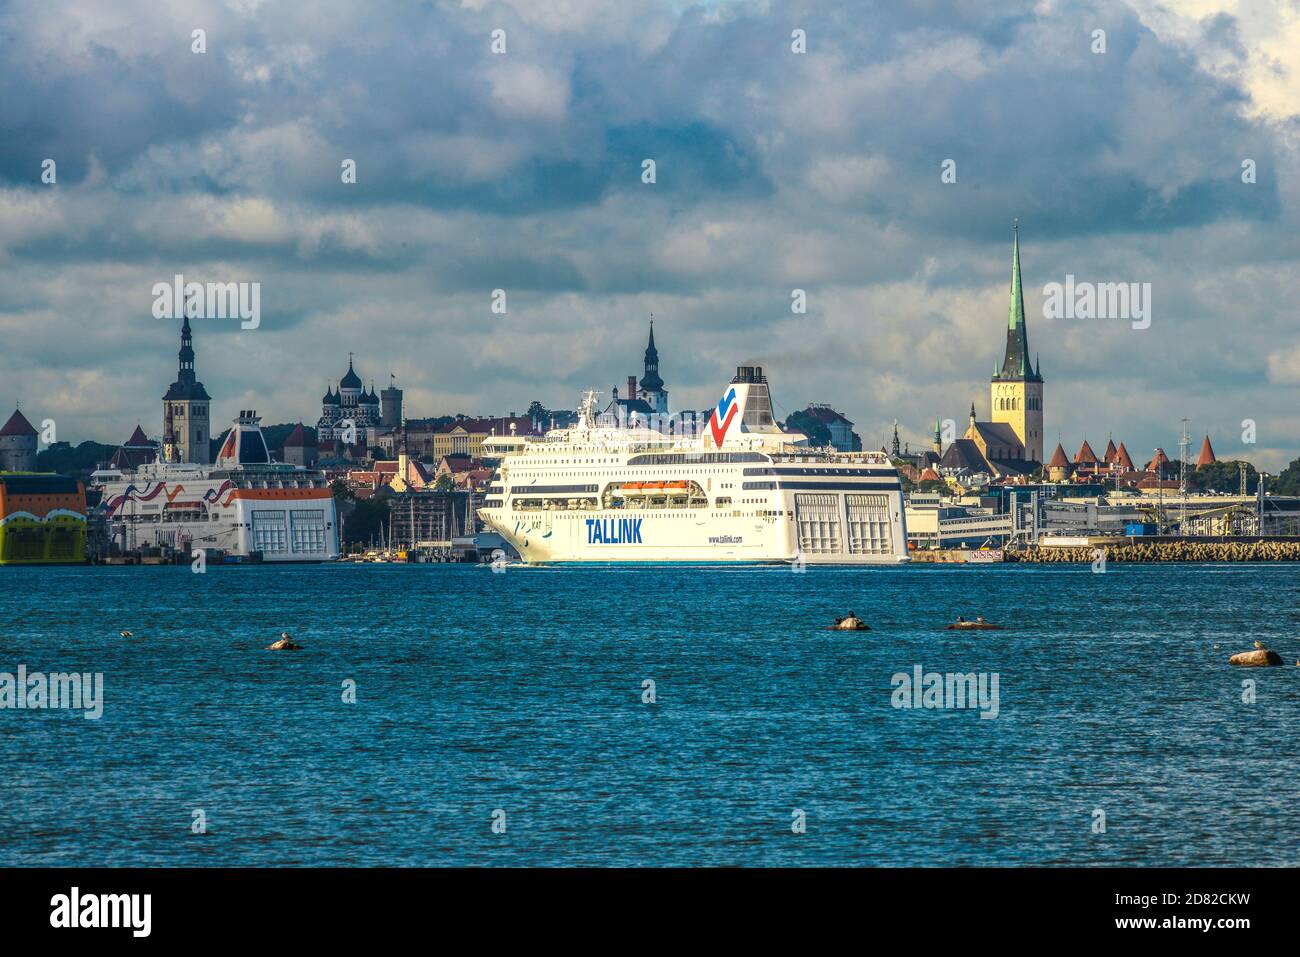 ESTONIA, TALLIN, Ferry entering the harbor of Tallin with historic town in background Stock Photo